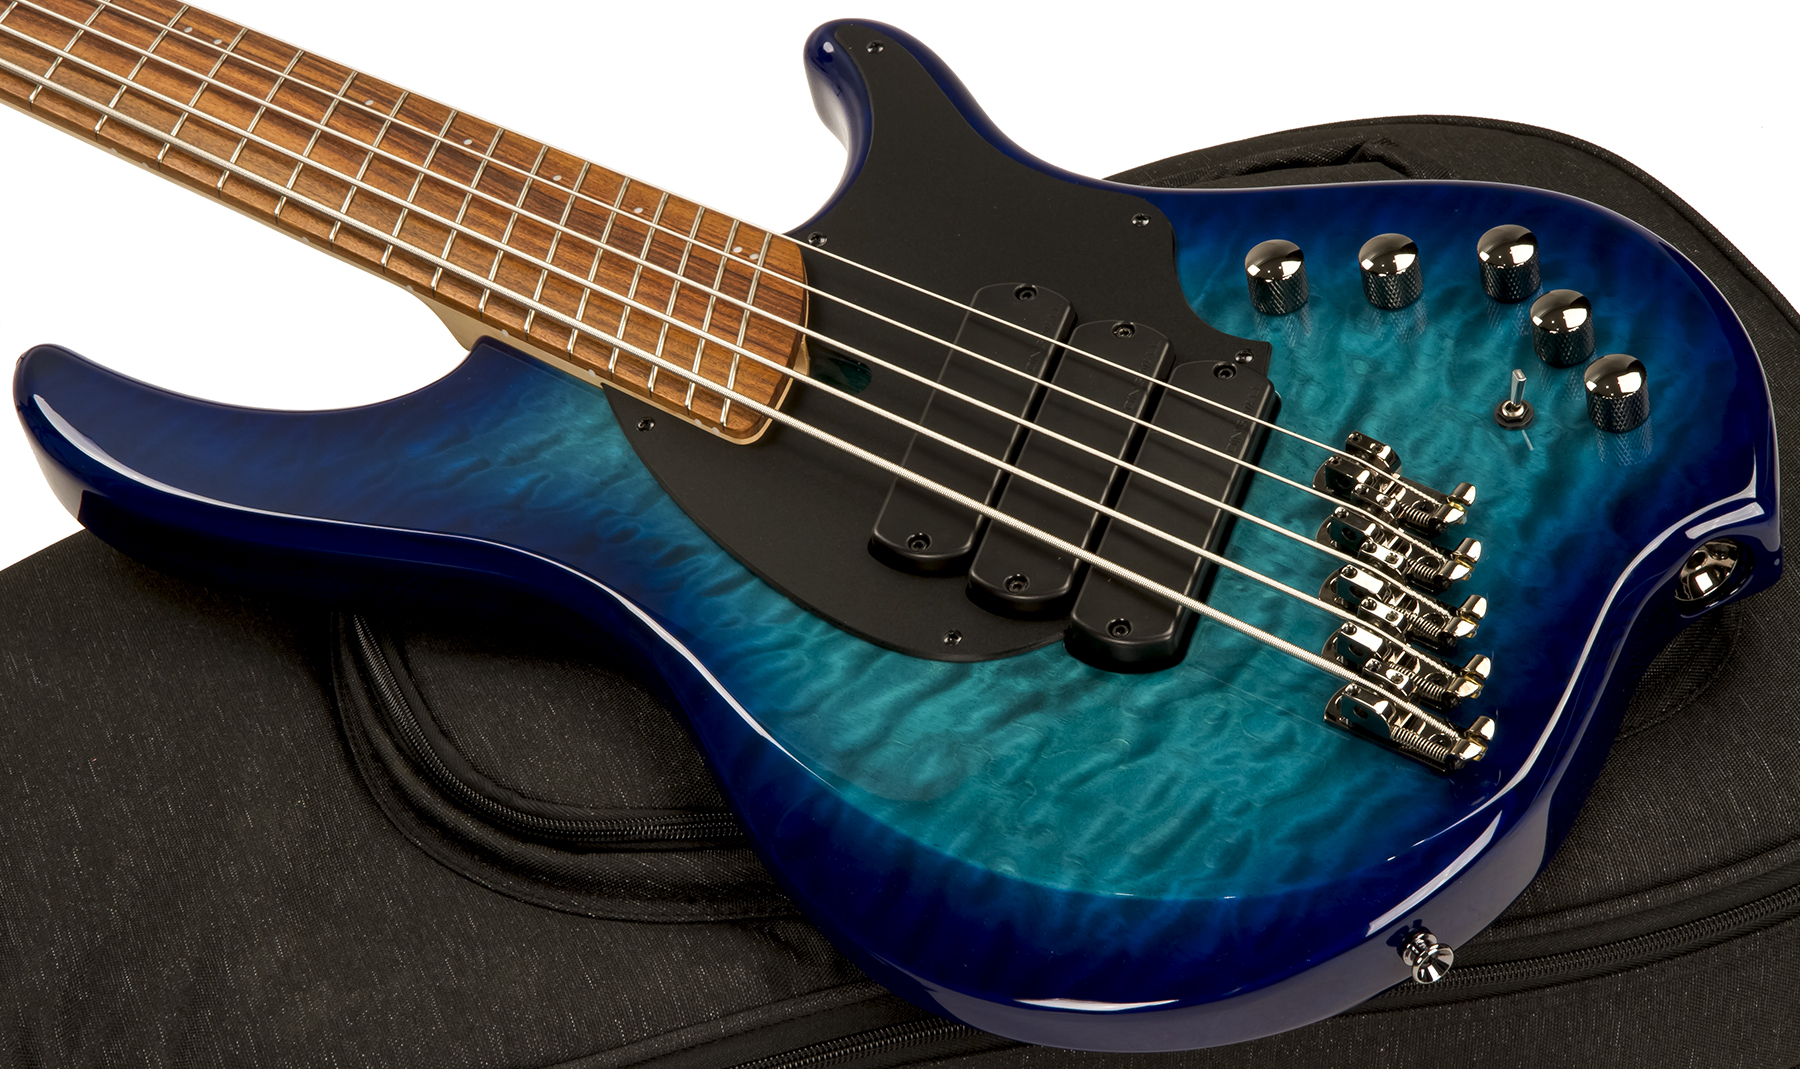 Dingwall Combustion 5 3-pickups Pf +housse - Whalepool Burst - Solid body electric bass - Variation 2